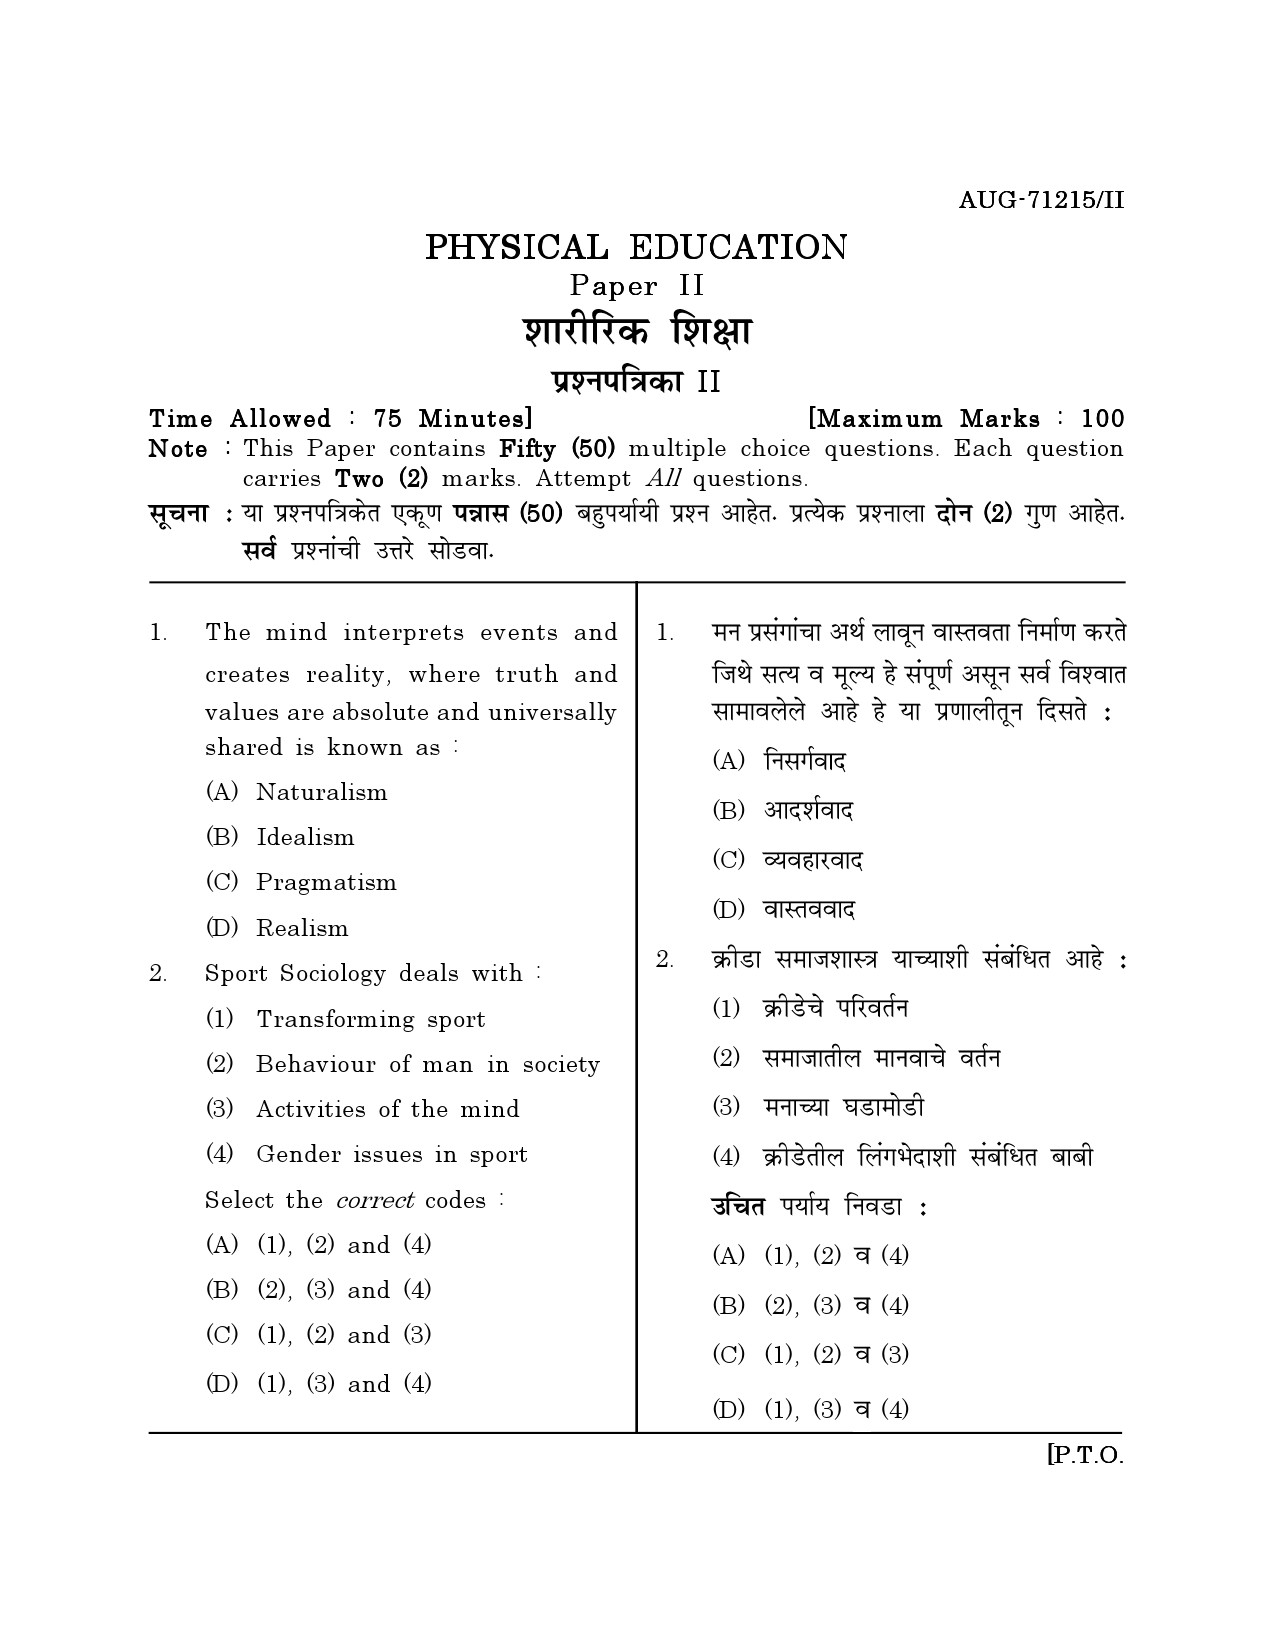 Maharashtra SET Physical Education Question Paper II August 2015 2